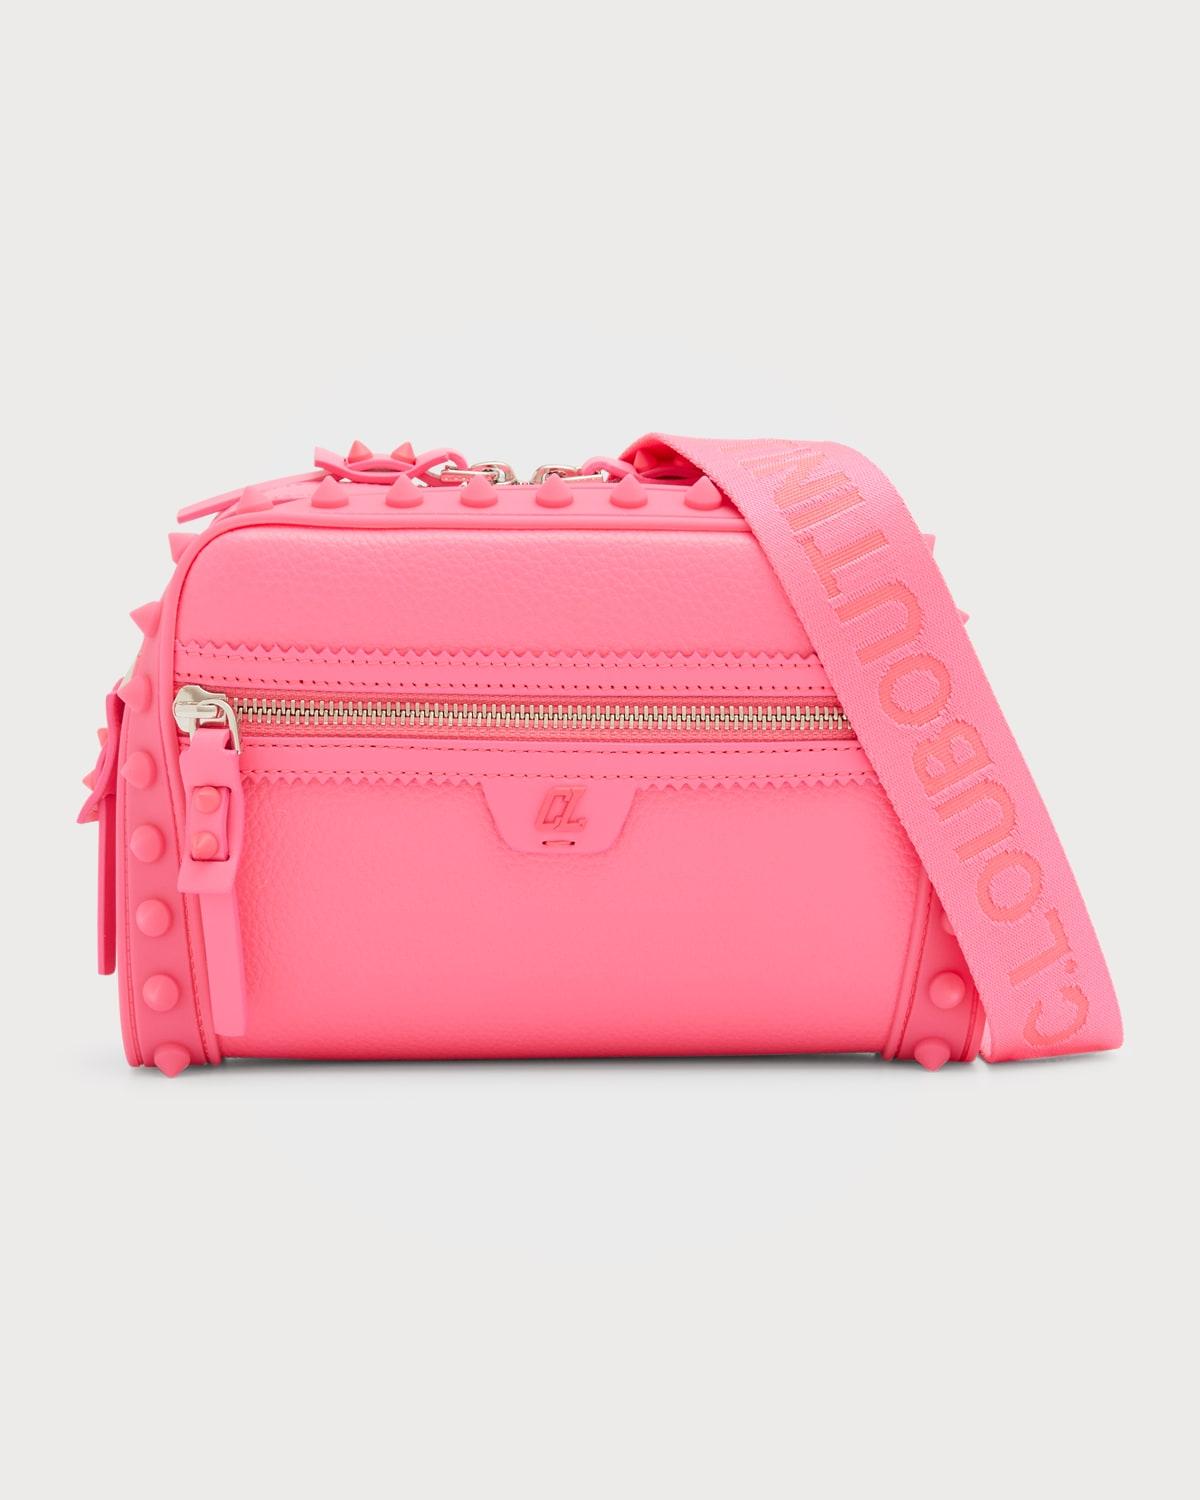 Christian Louboutin Loubitown Spike Zip Leather Crossbody Bag in Pink | Lyst